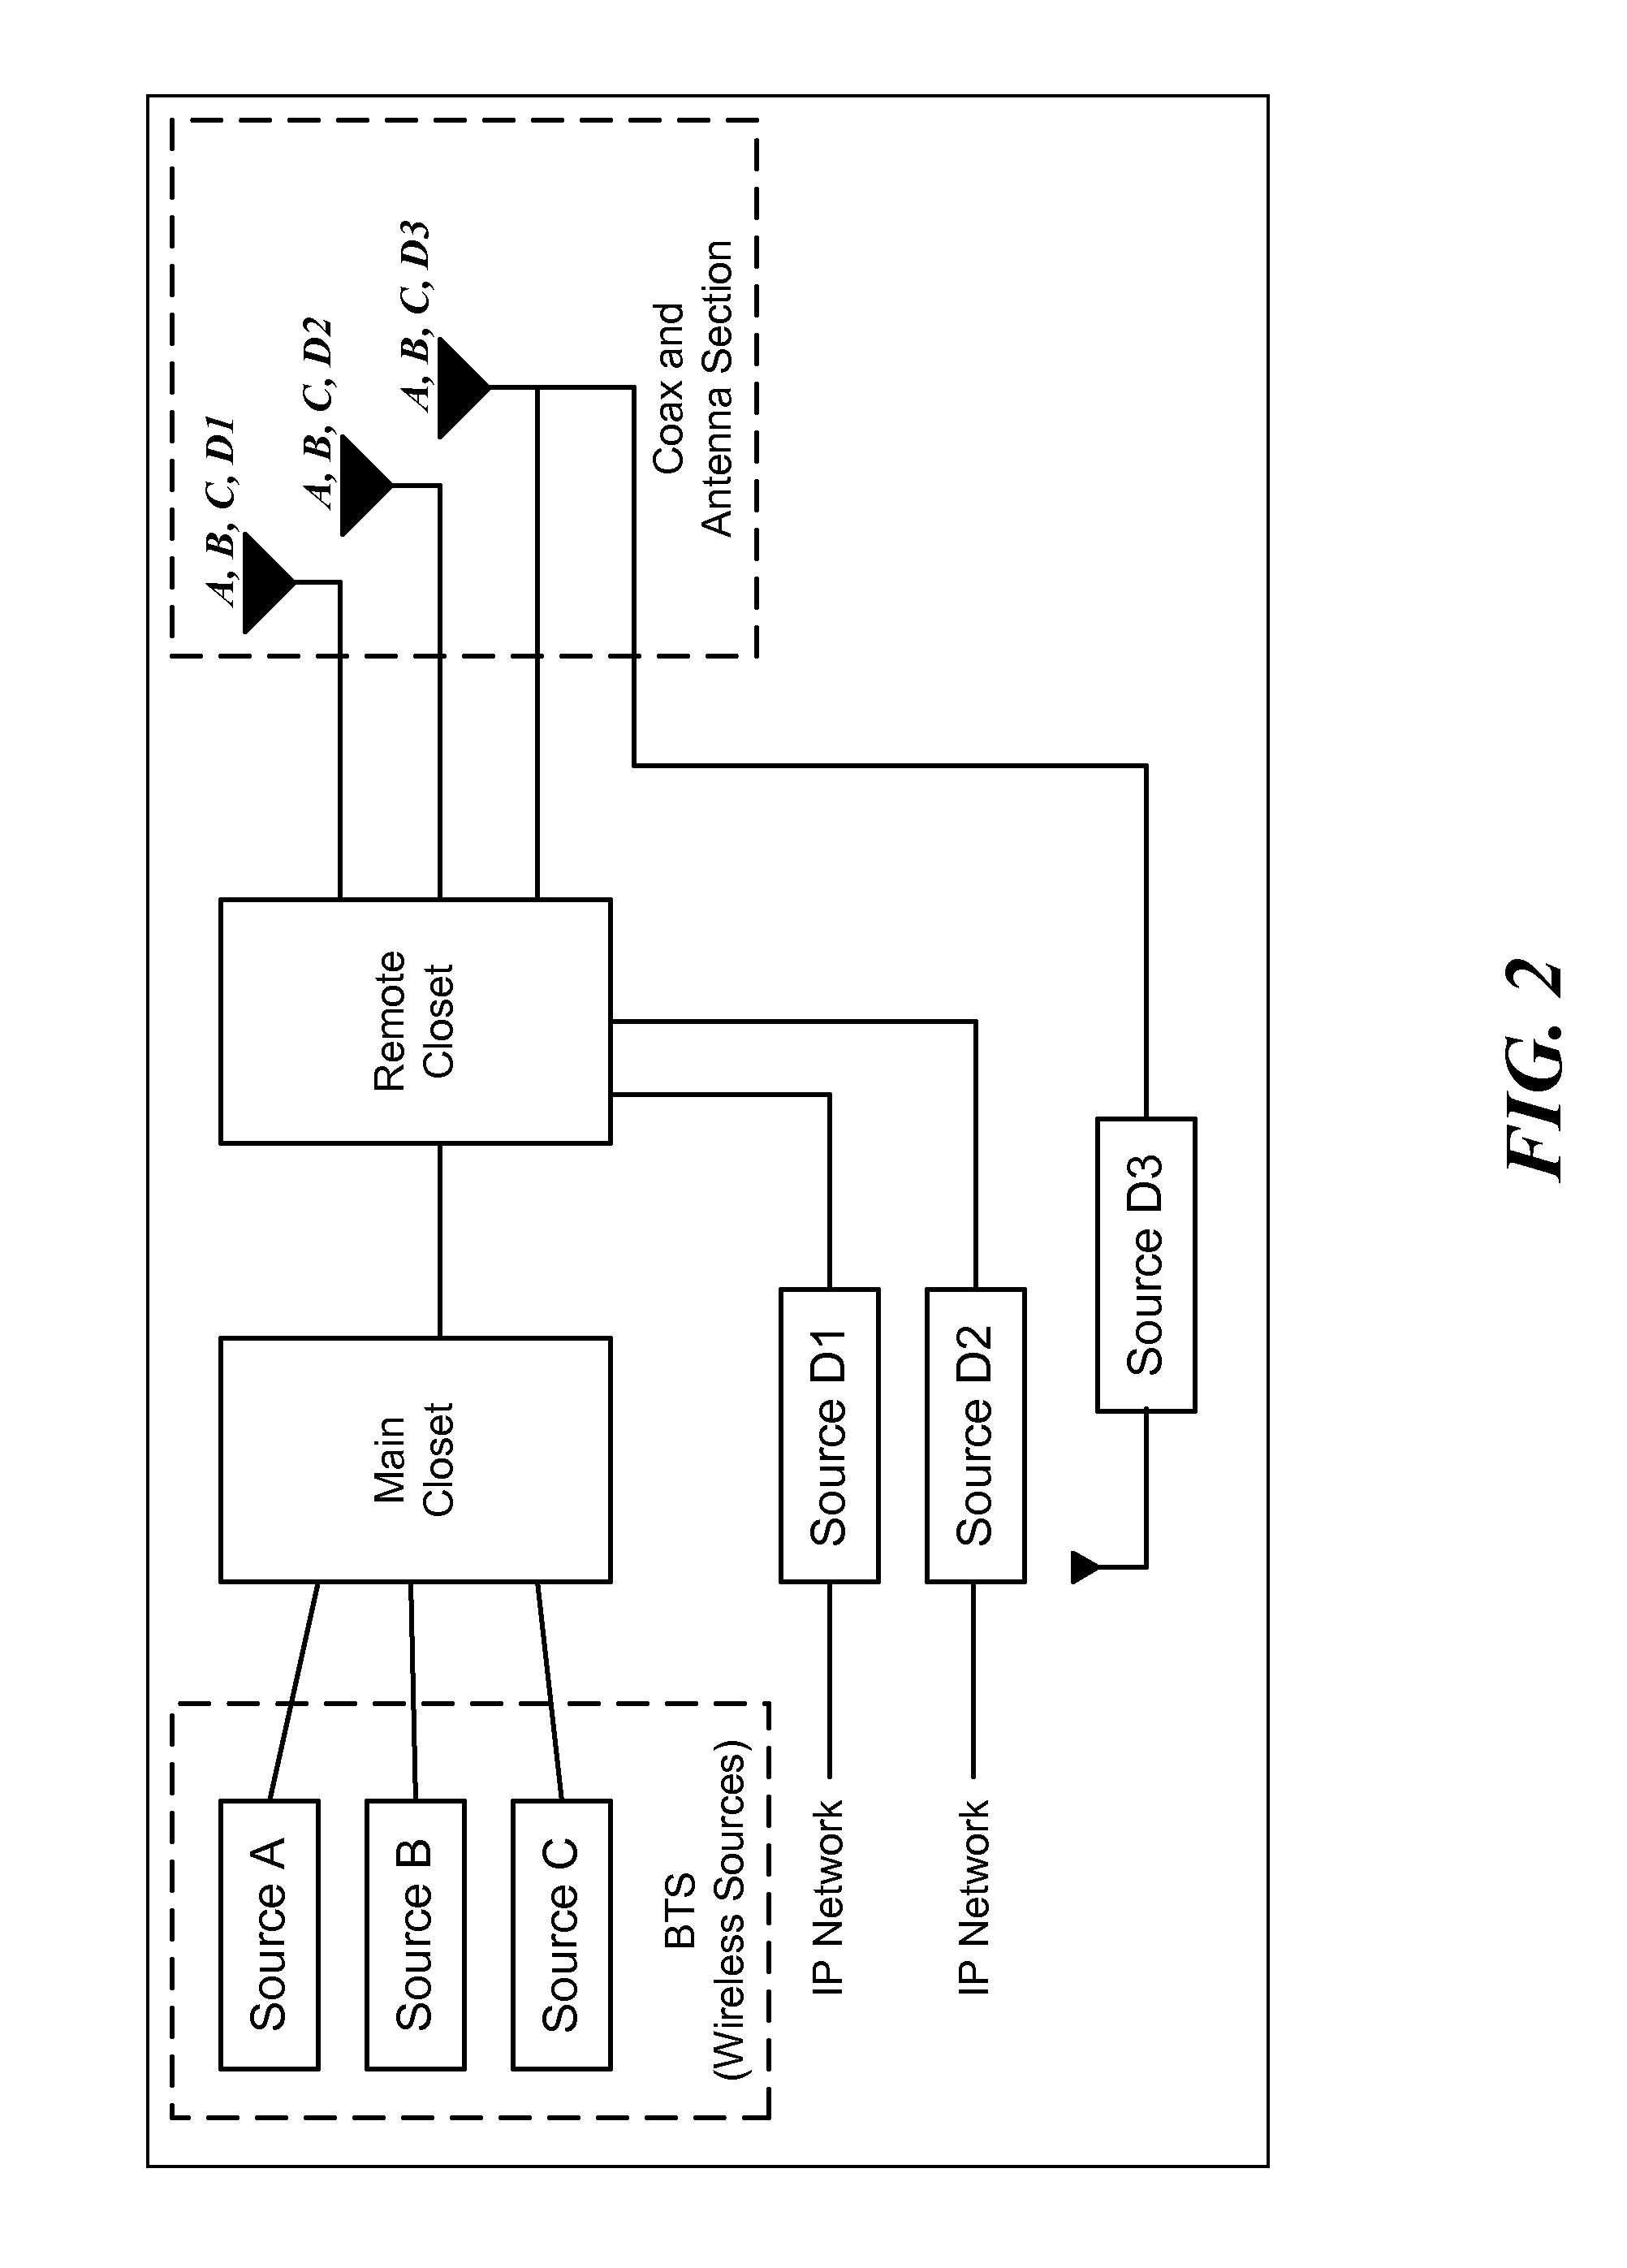 Multiple Data Services Over a Distributed Antenna System